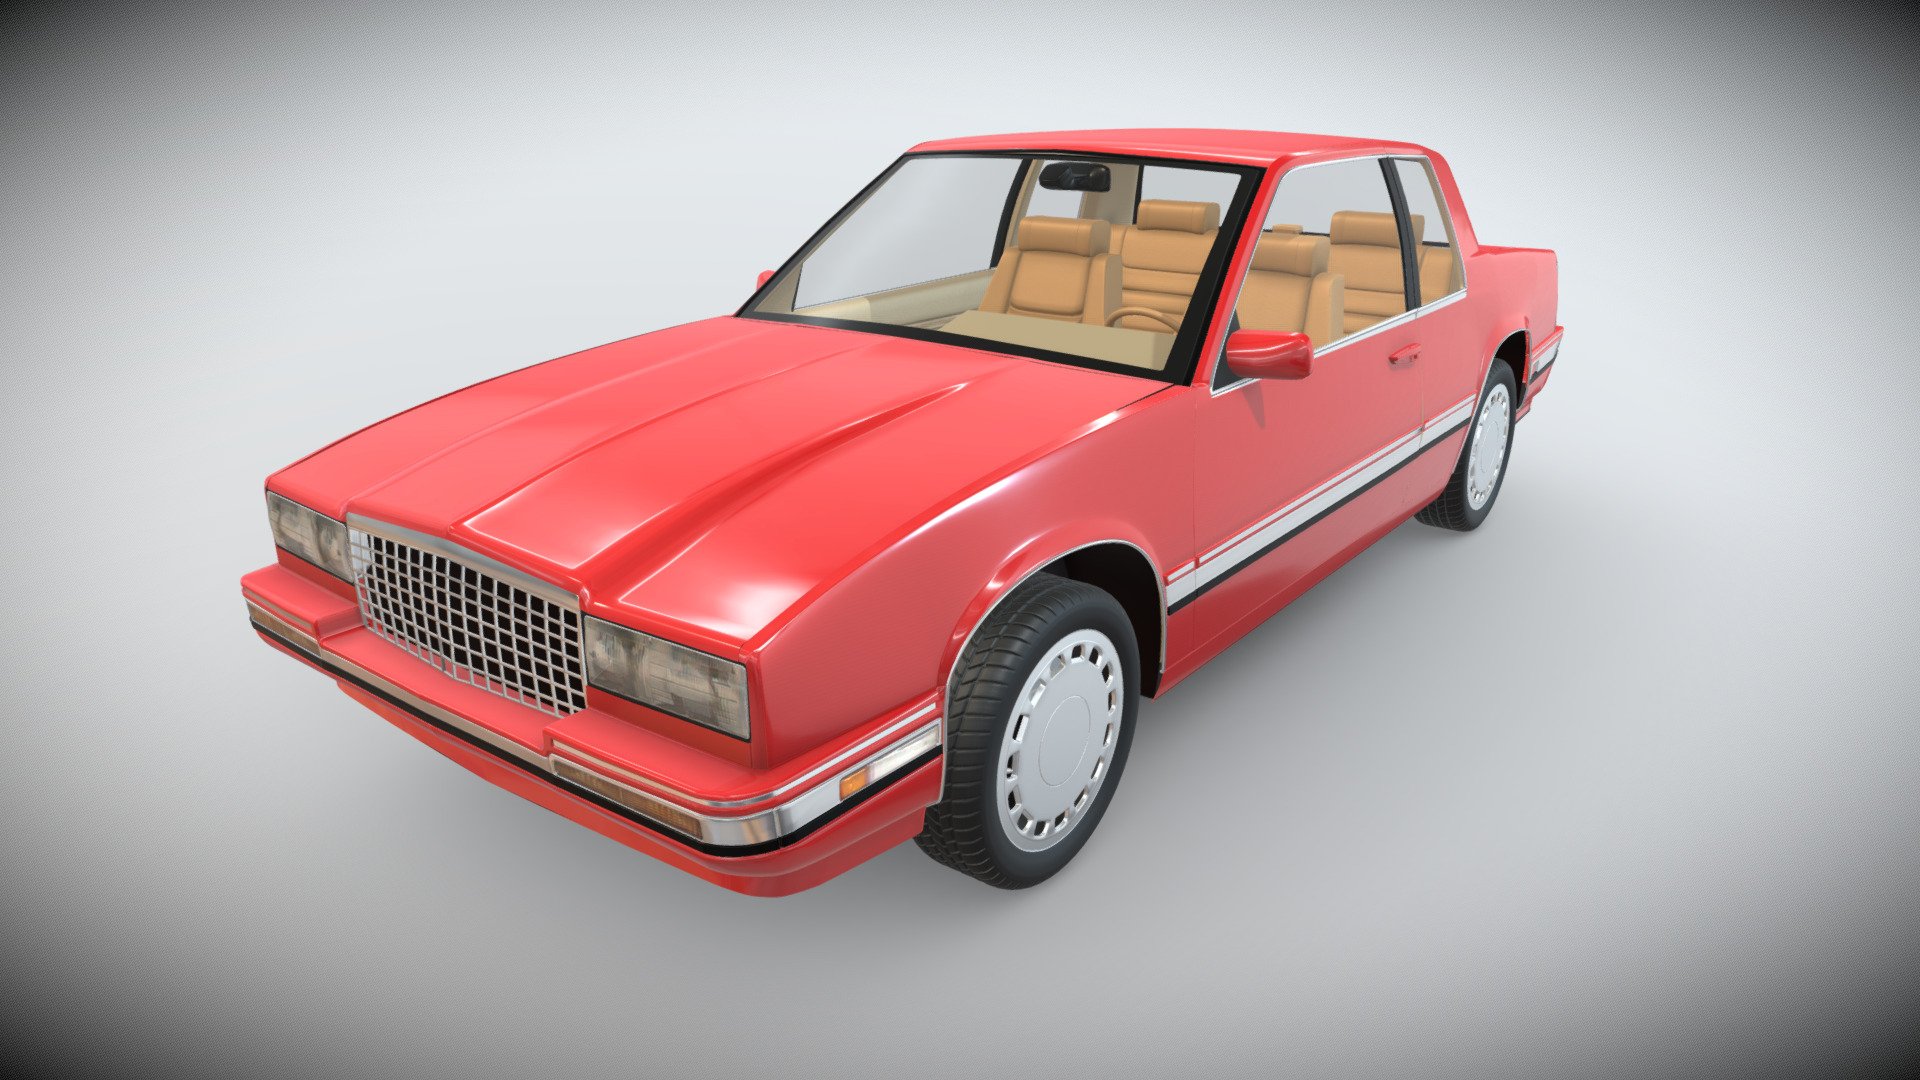 1991 Cadillac Eldorado with interior

the model is good for animations and etc. Clean edge-loops based topology

You can buy it here:
cgtrader[dot]com/3d-models/car/antique/1991-cadillac-eldorado-with-interior - 1991 Cadillac Eldorado with interior - 3D model by JK3Dstudios (@JK3Dstudio) 3d model